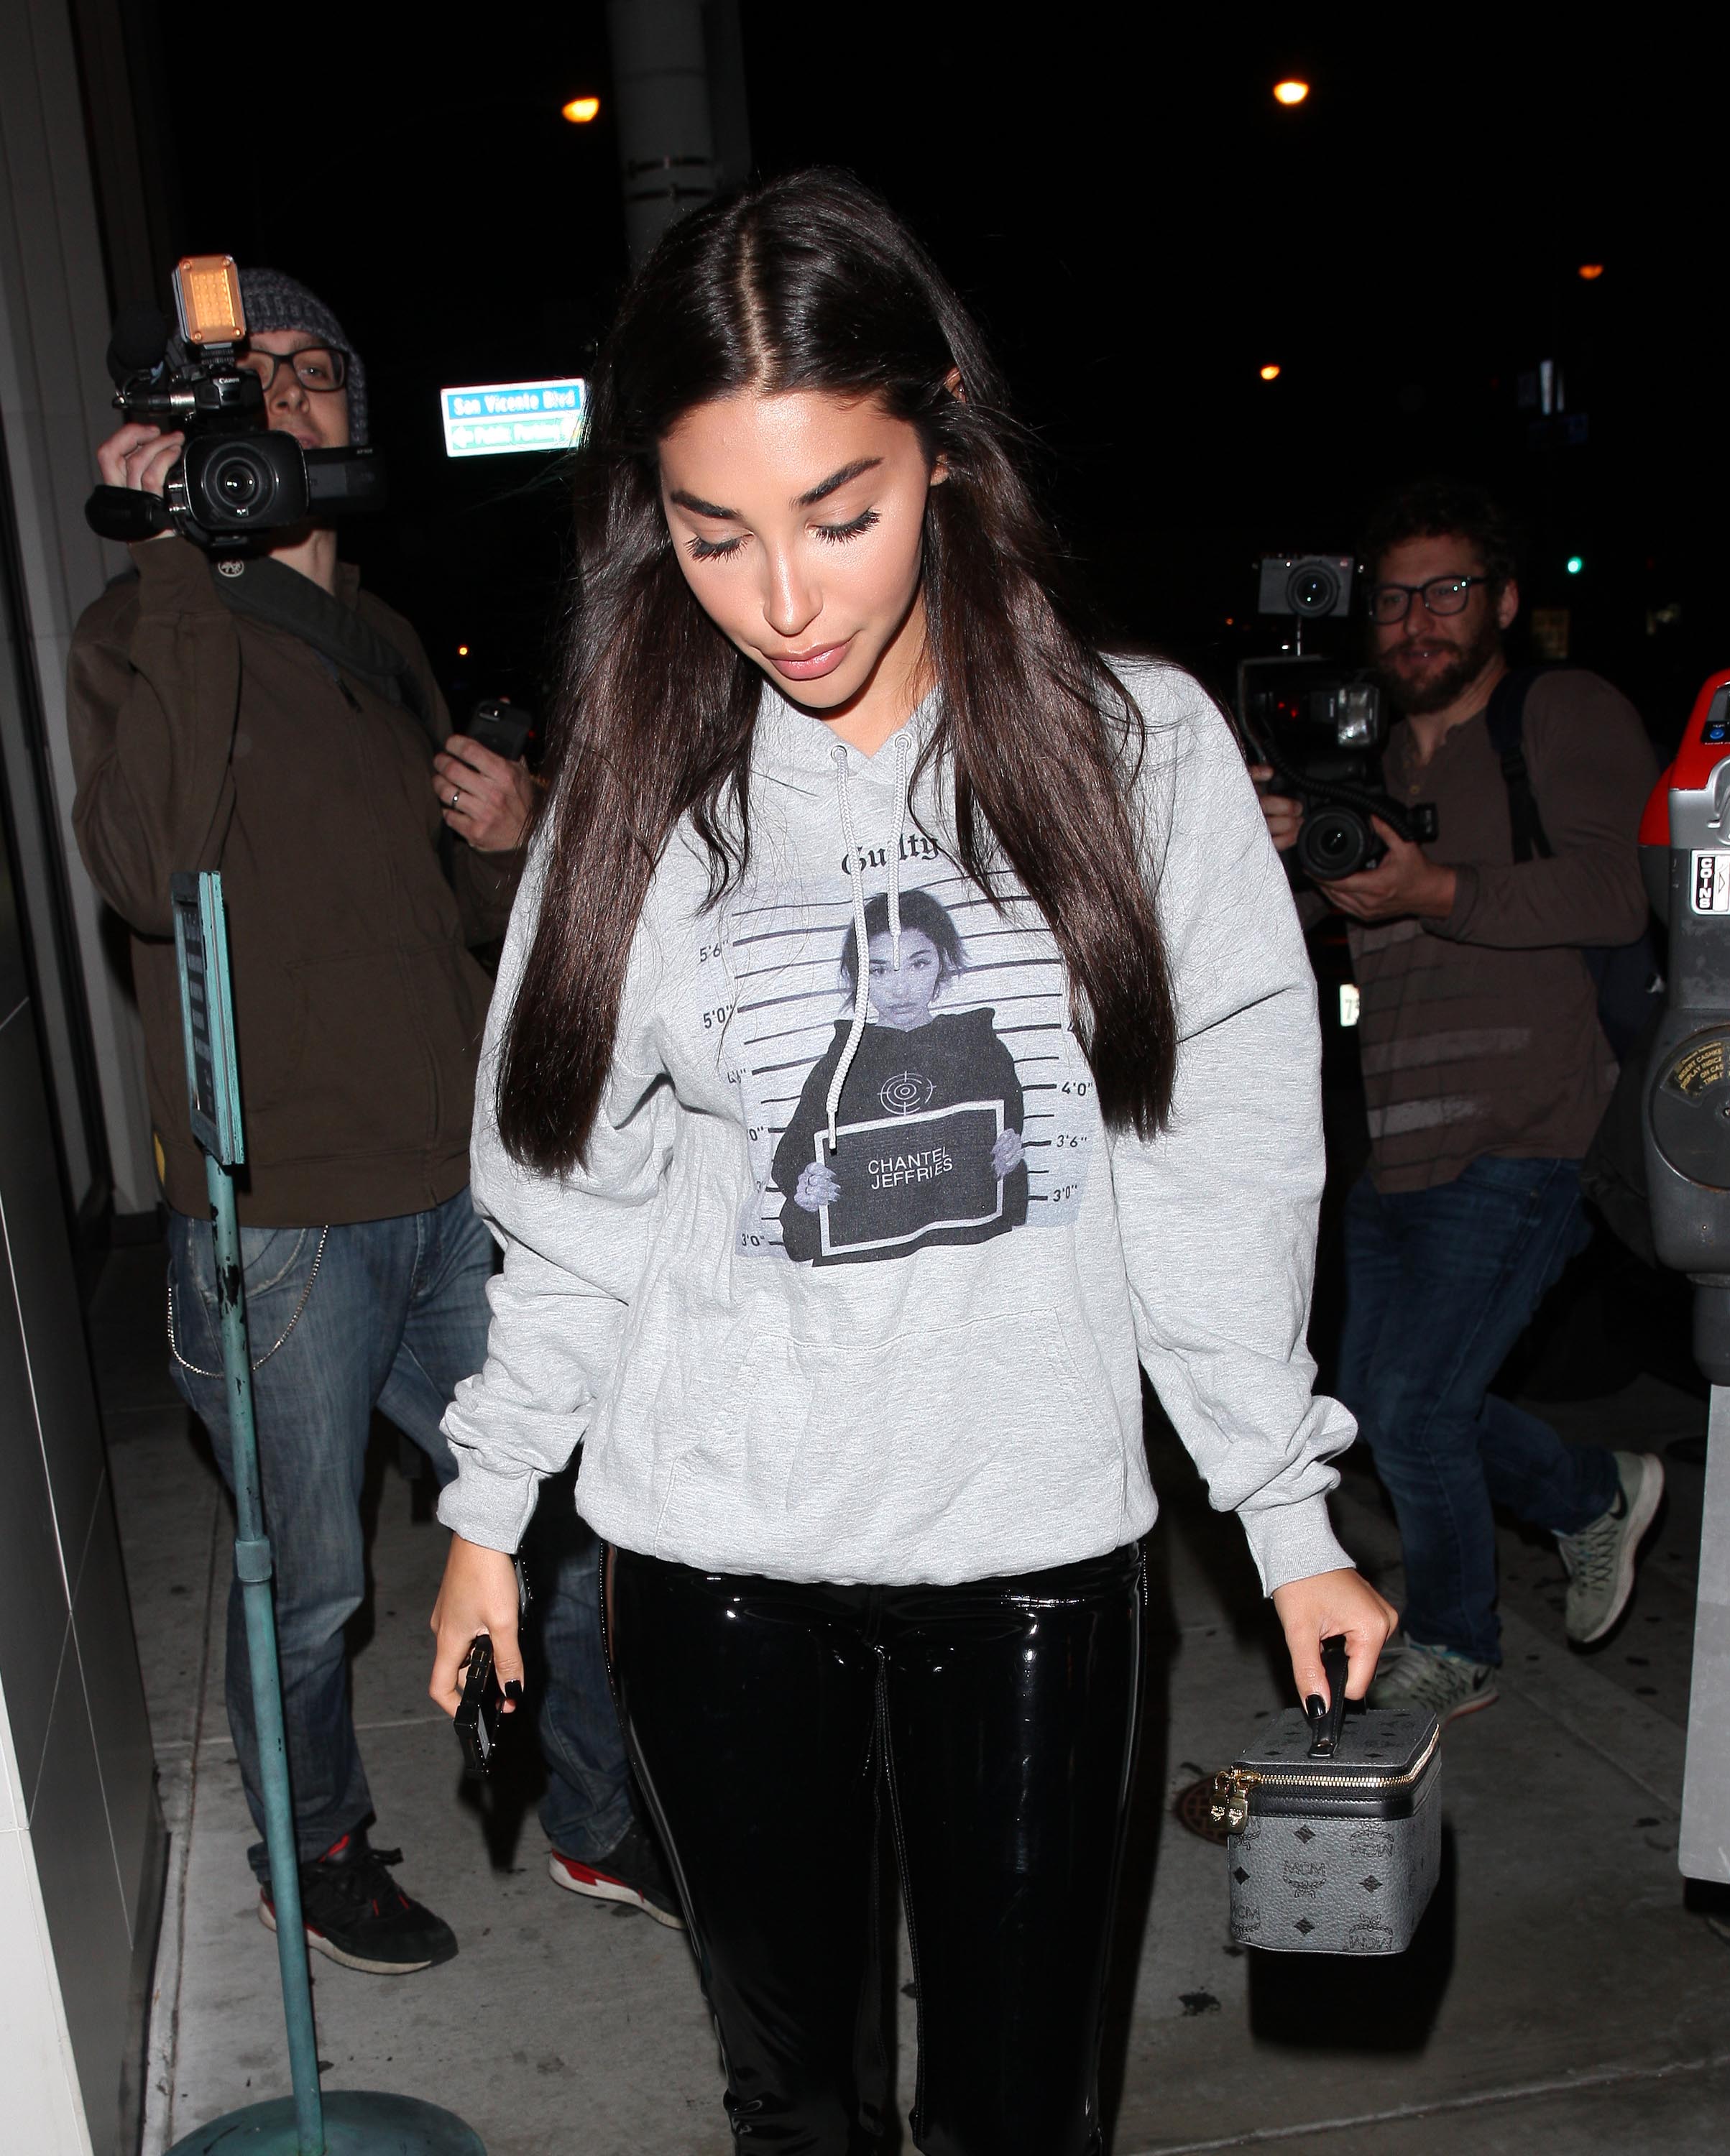 Chantel Jeffries spotted at Catch restaurant